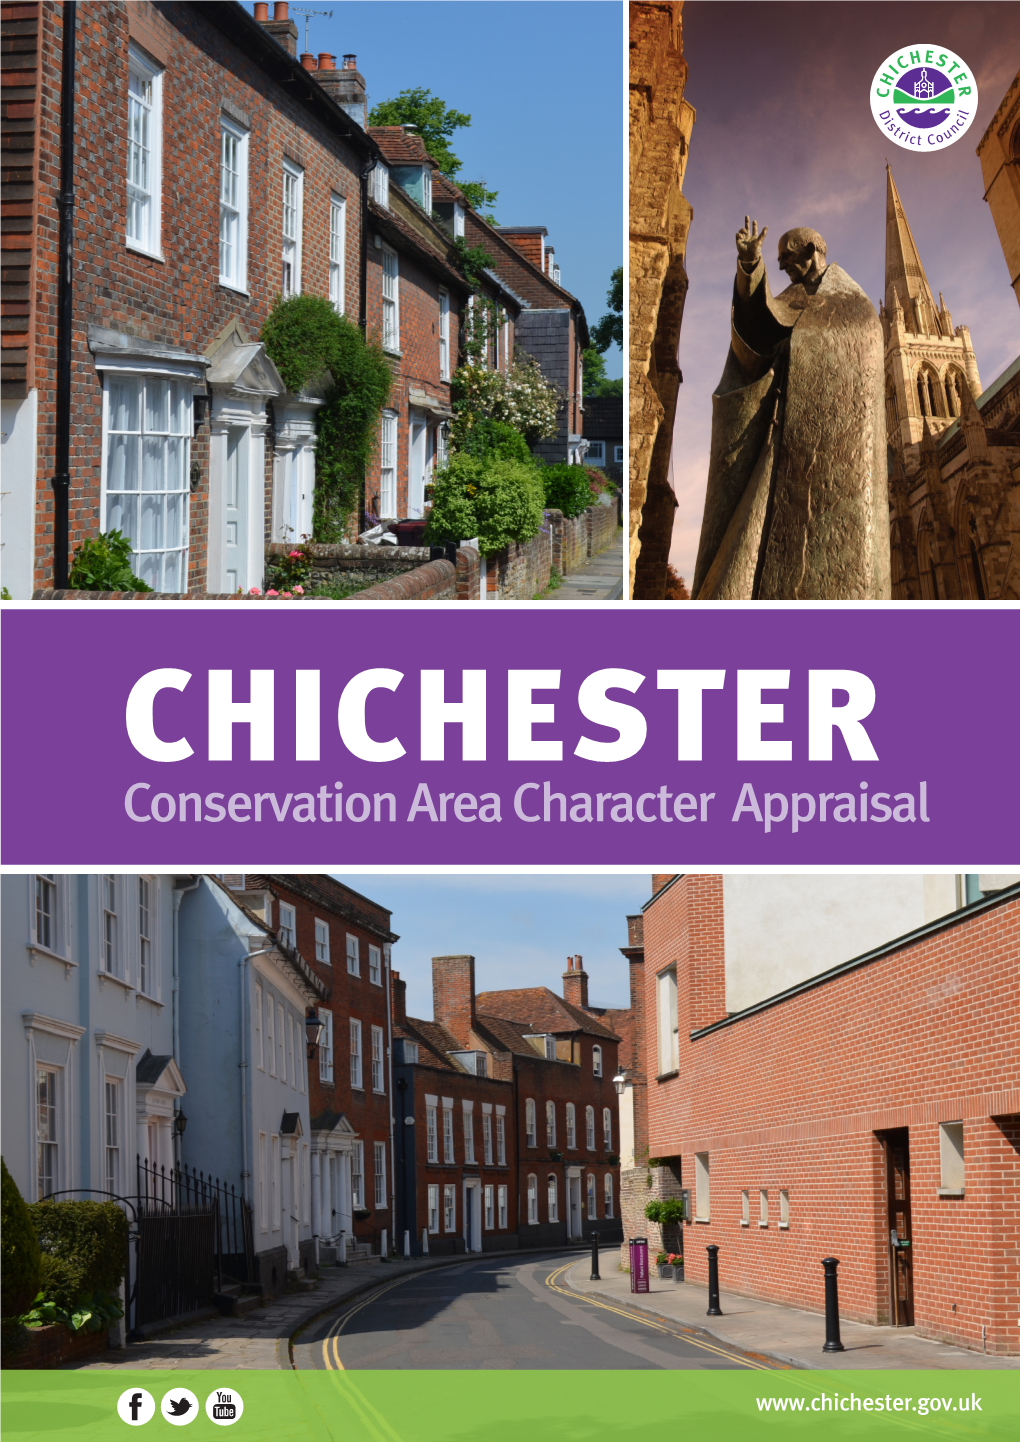 Conservation Area Character Appraisal